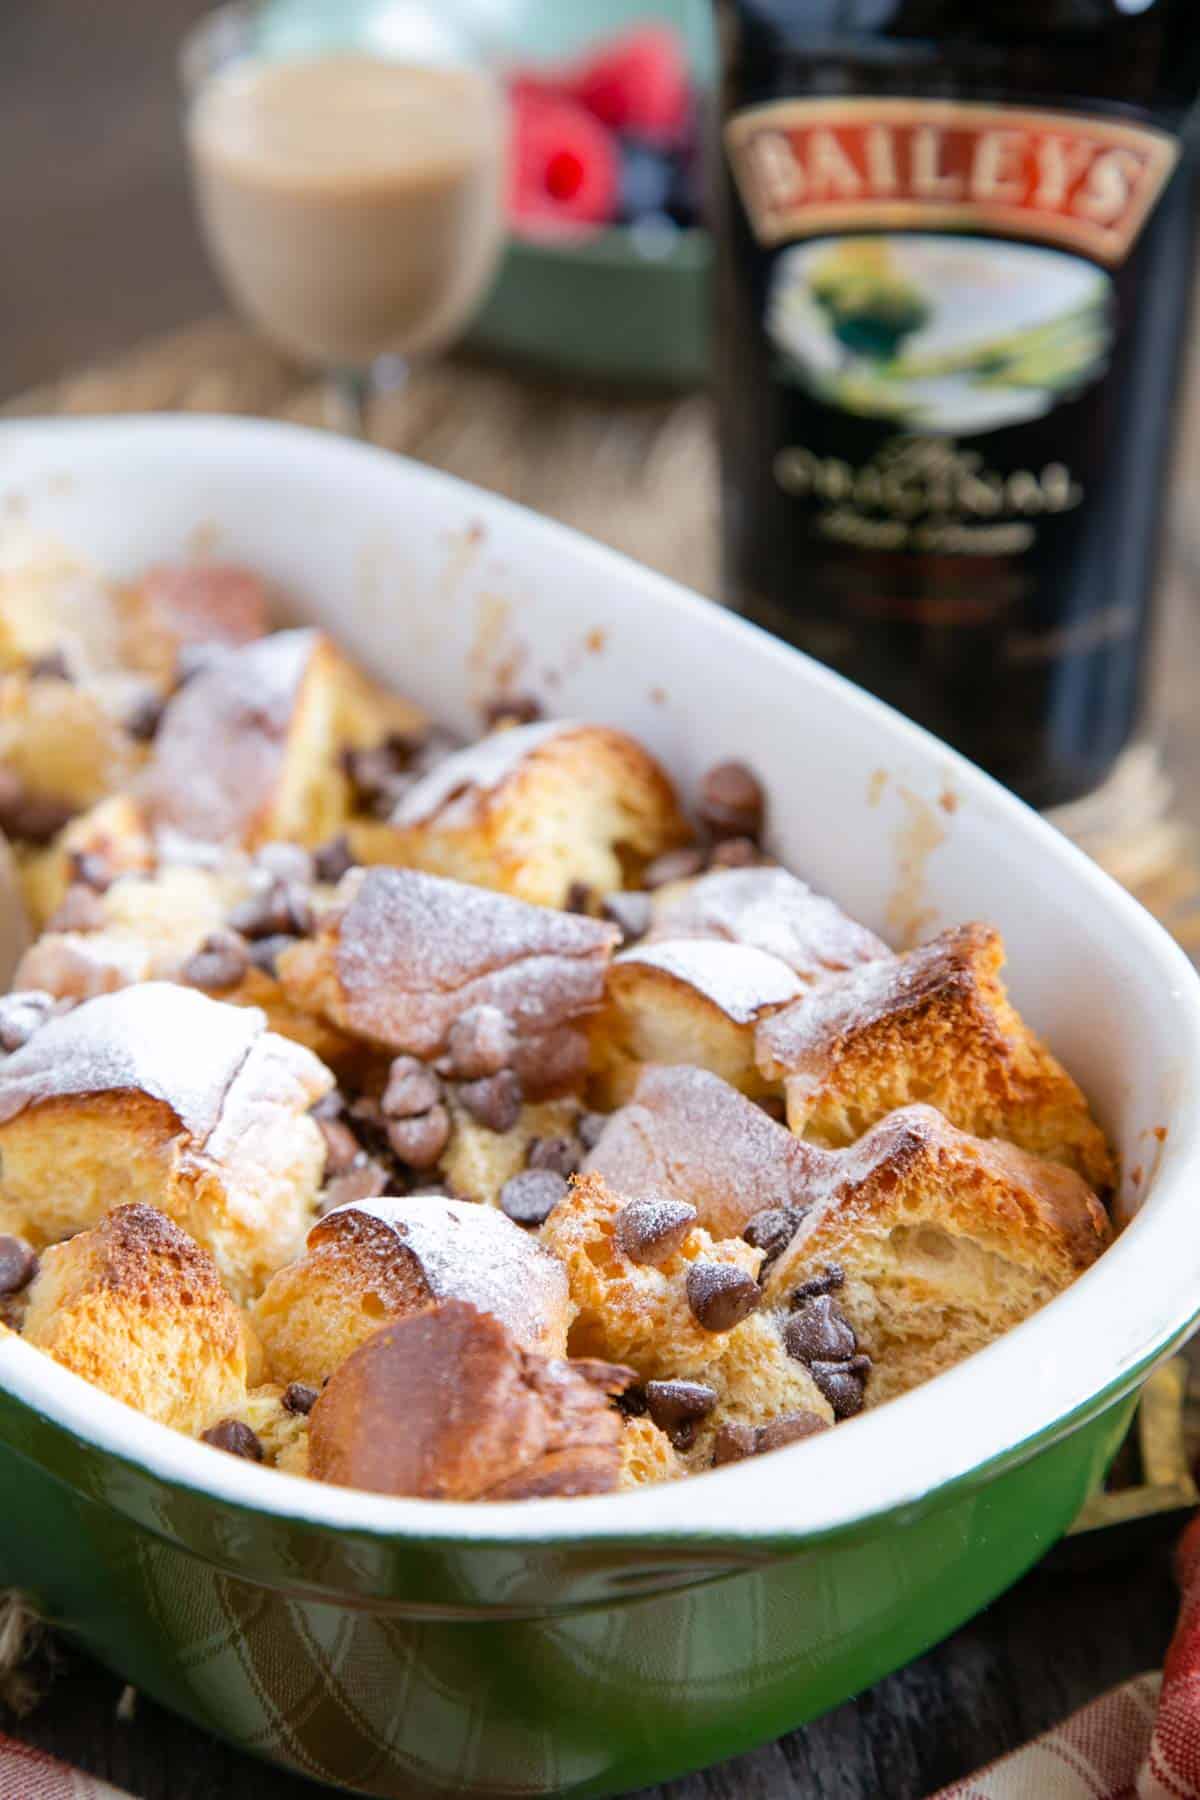 Delicious Irish cream bread and butter pudding, made with light and airy brioche. A bottle of Baileys Irish cream in the background. A close up of the dish, which has been dusted with icing sugar.